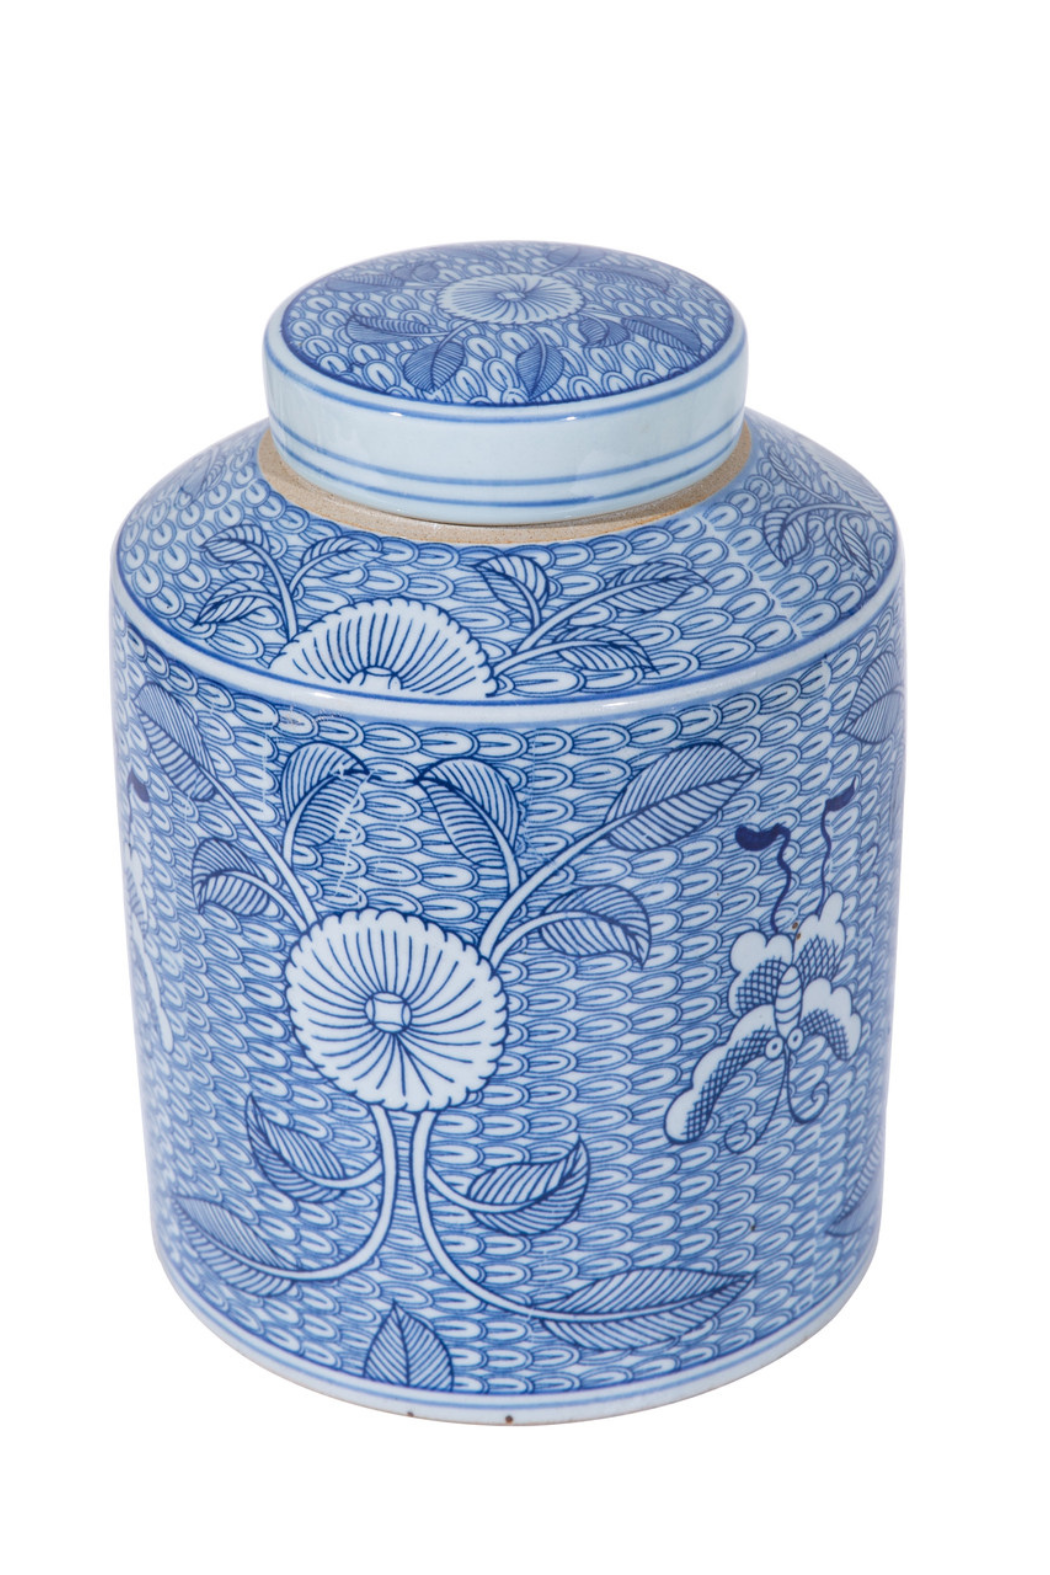 Blue & White Butterfly Leaf Tea Jar For Sophie & Coulson